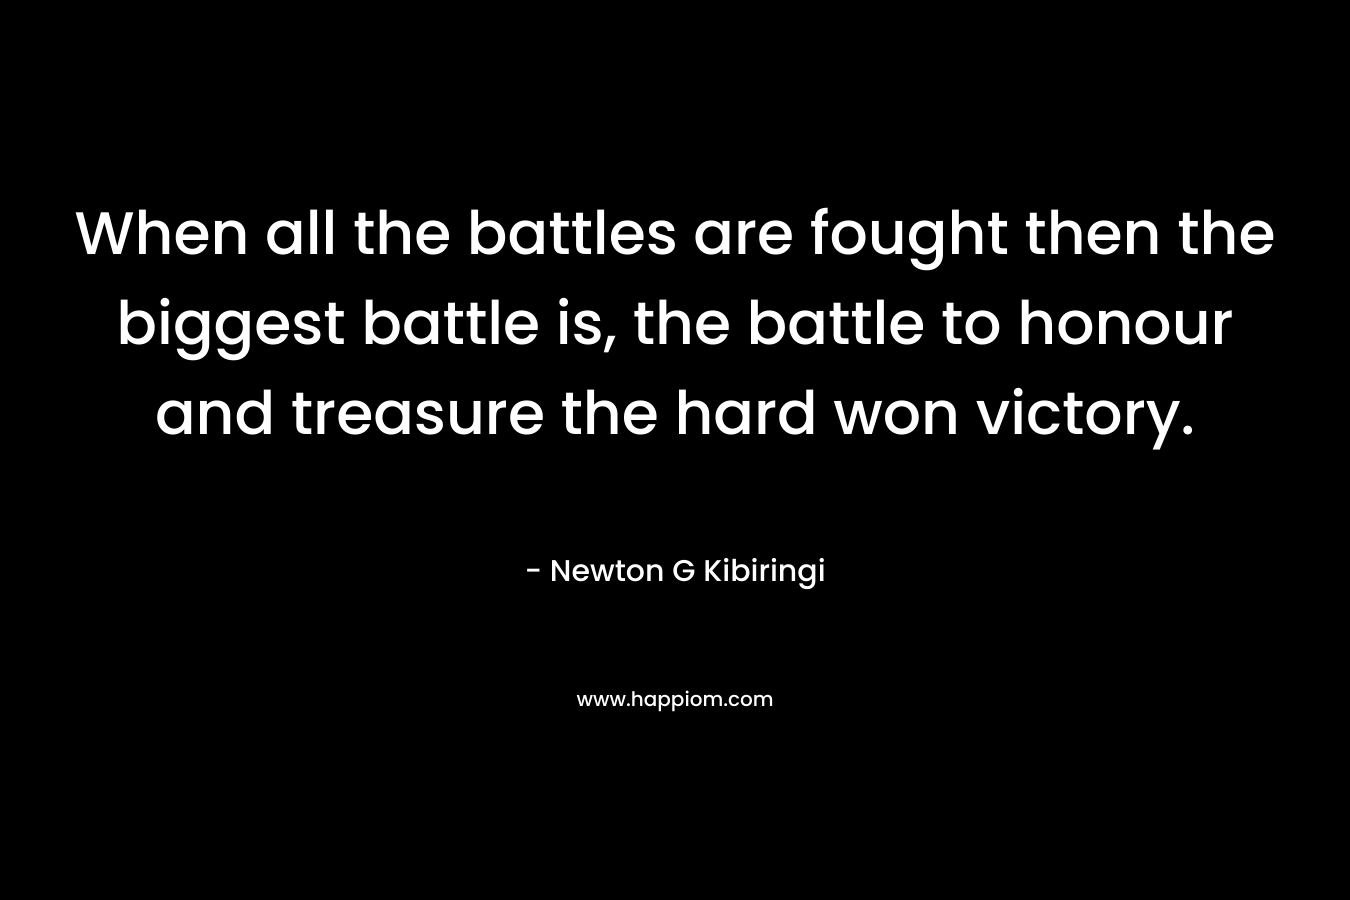 When all the battles are fought then the biggest battle is, the battle to honour and treasure the hard won victory.